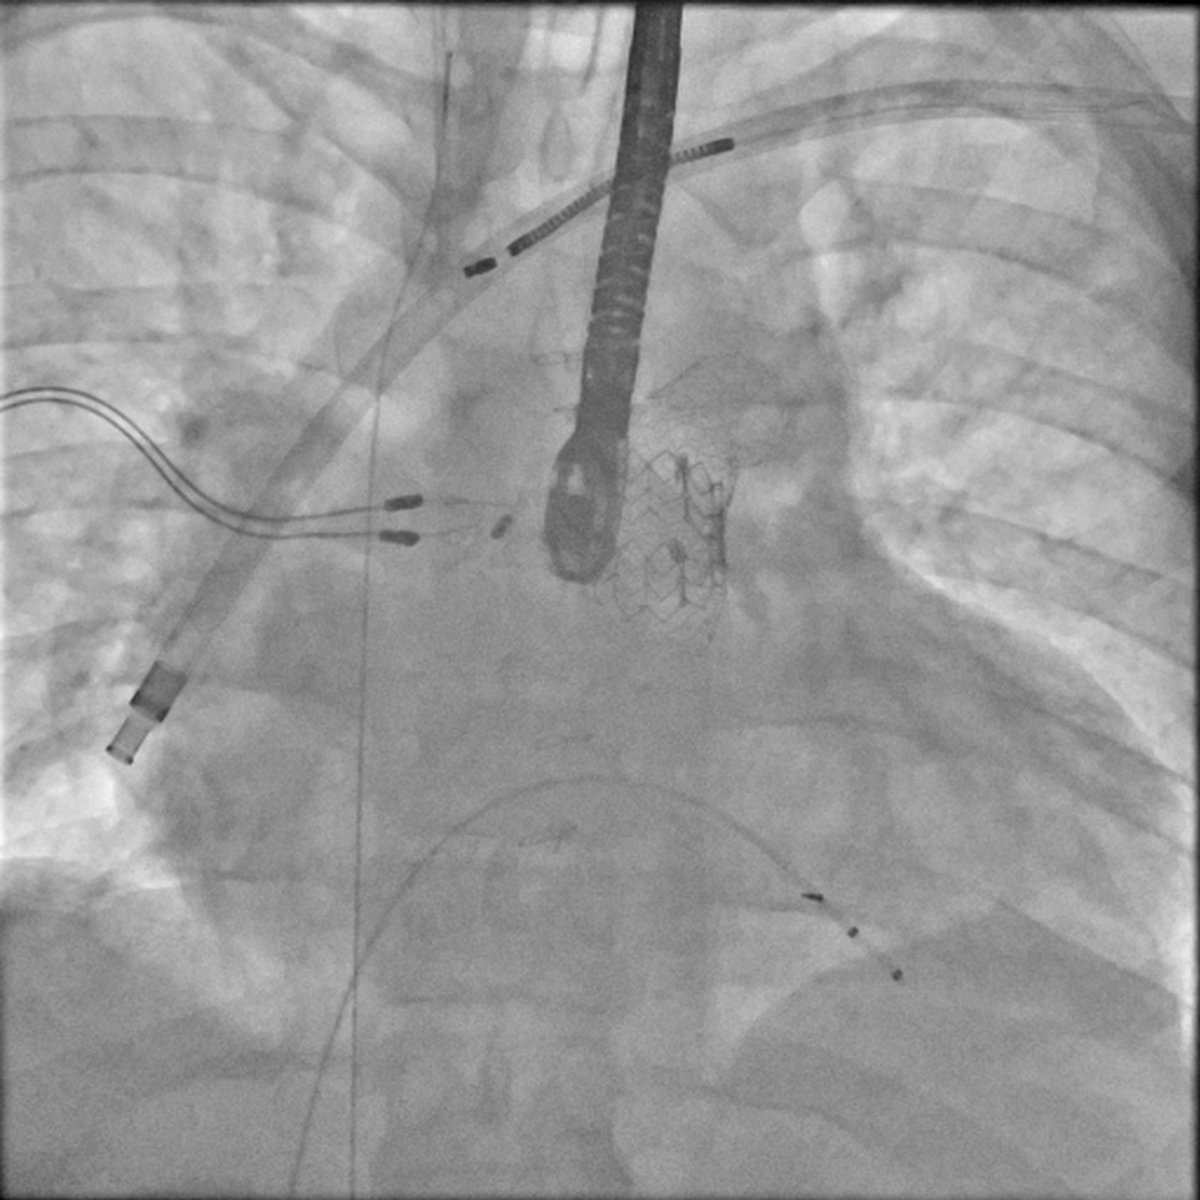 Mechanical rotational TLE in GUCH patient for infection. Dual chamber ICD (dual coil, passive fixation), dwell time 12 years.